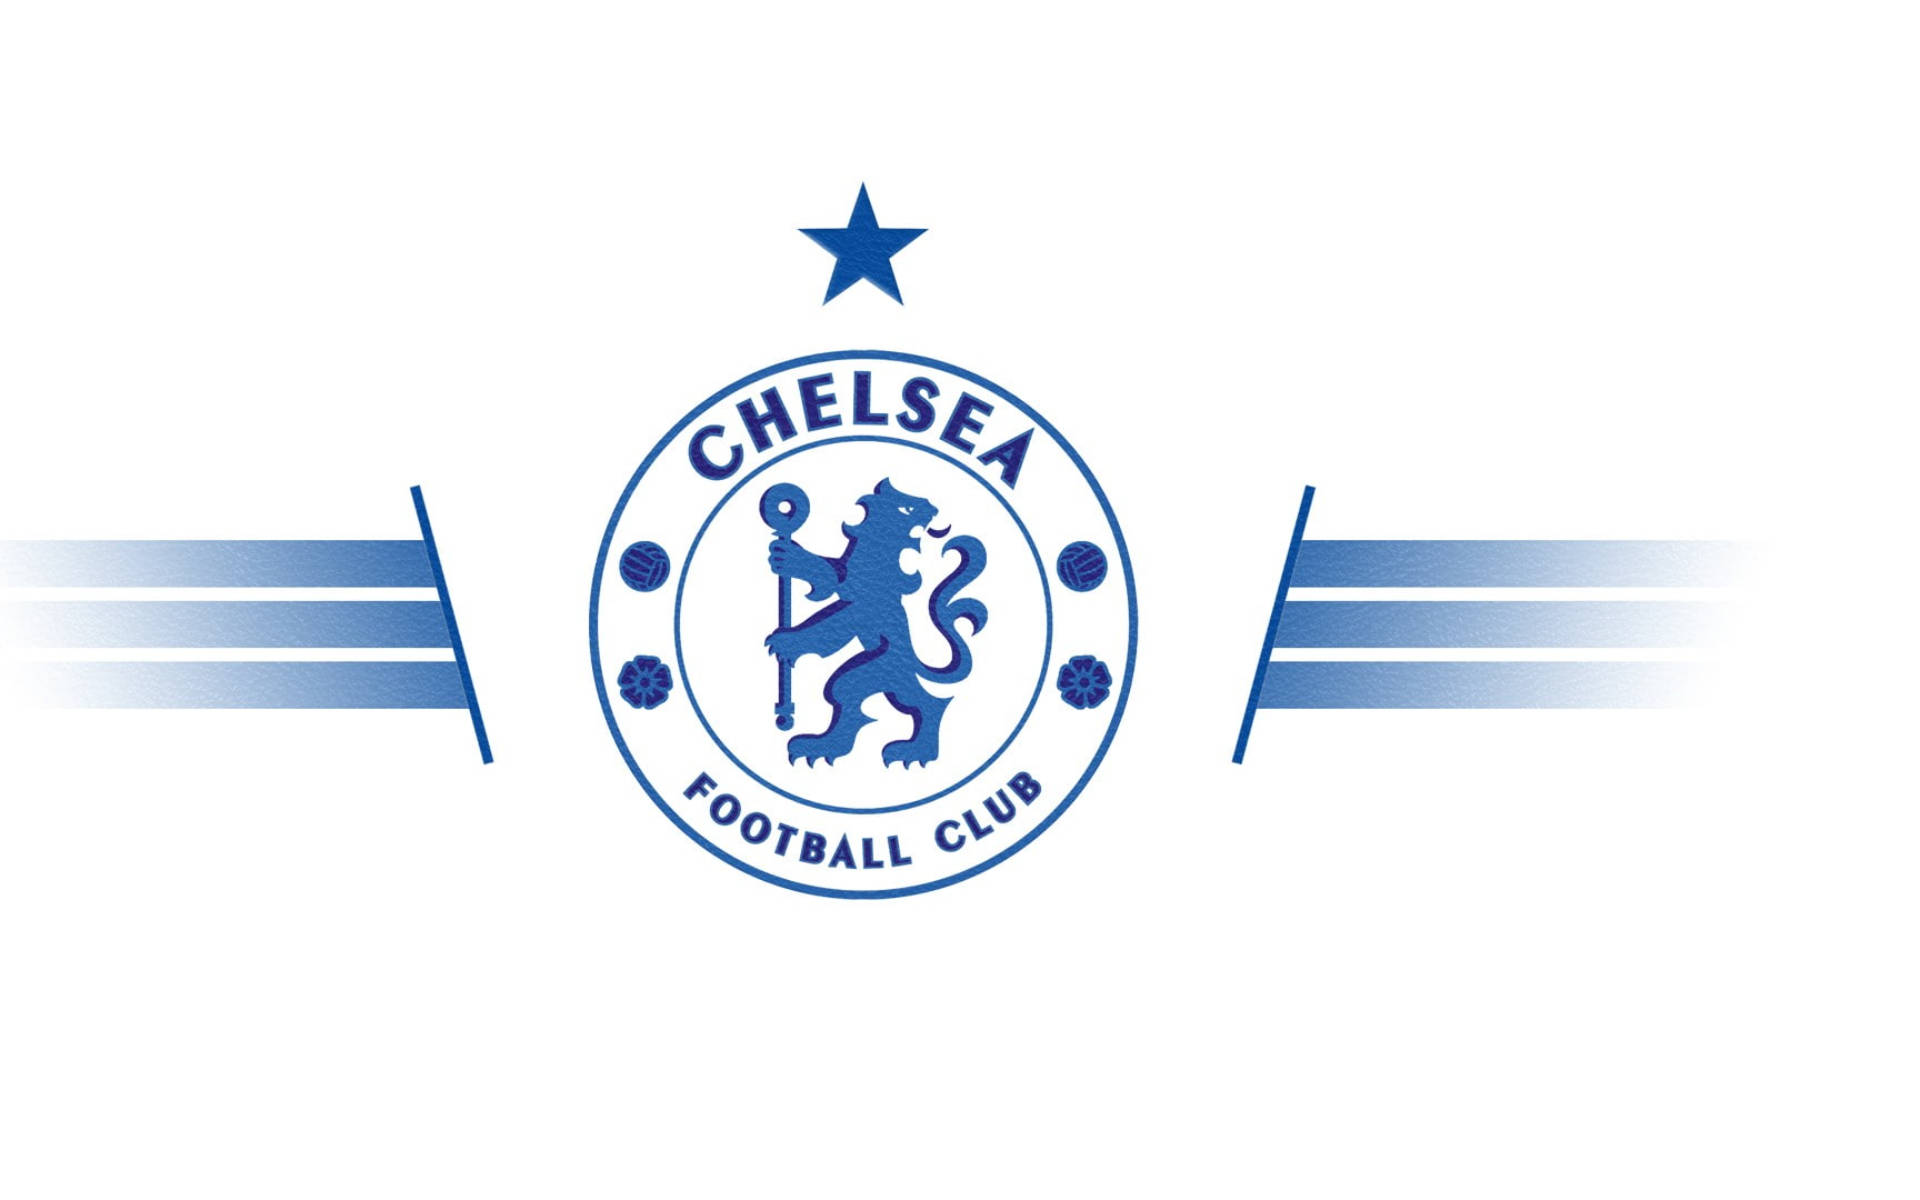 Chelsea Emblem In White Background